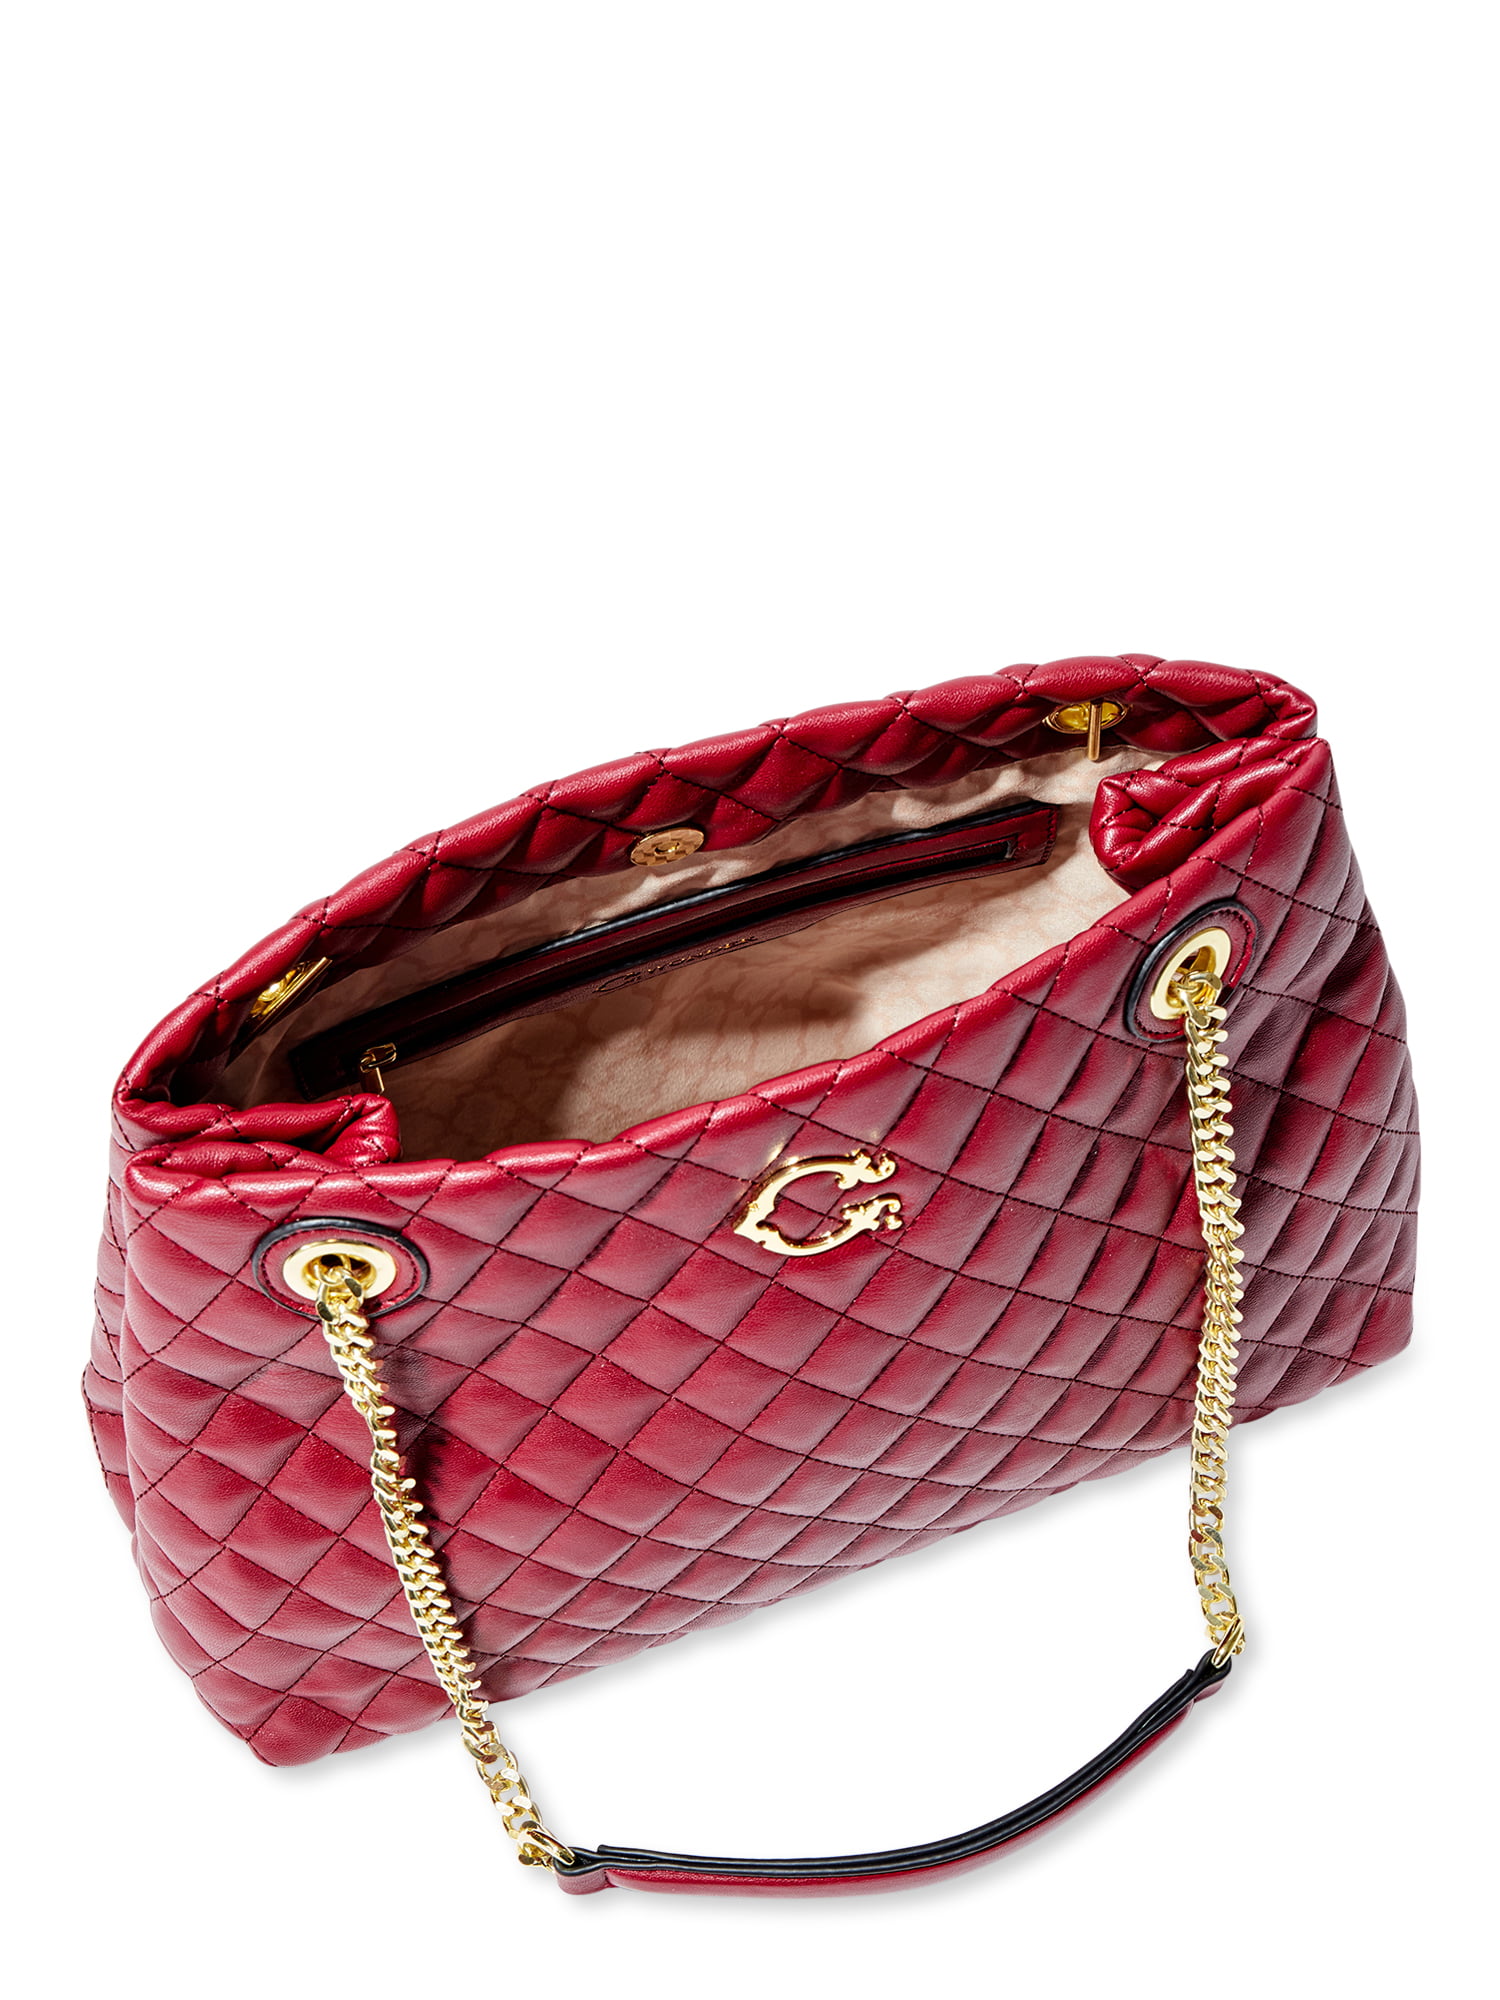 C. Wonder Women's Kimberly Quilted Tote Bag Rumba Red